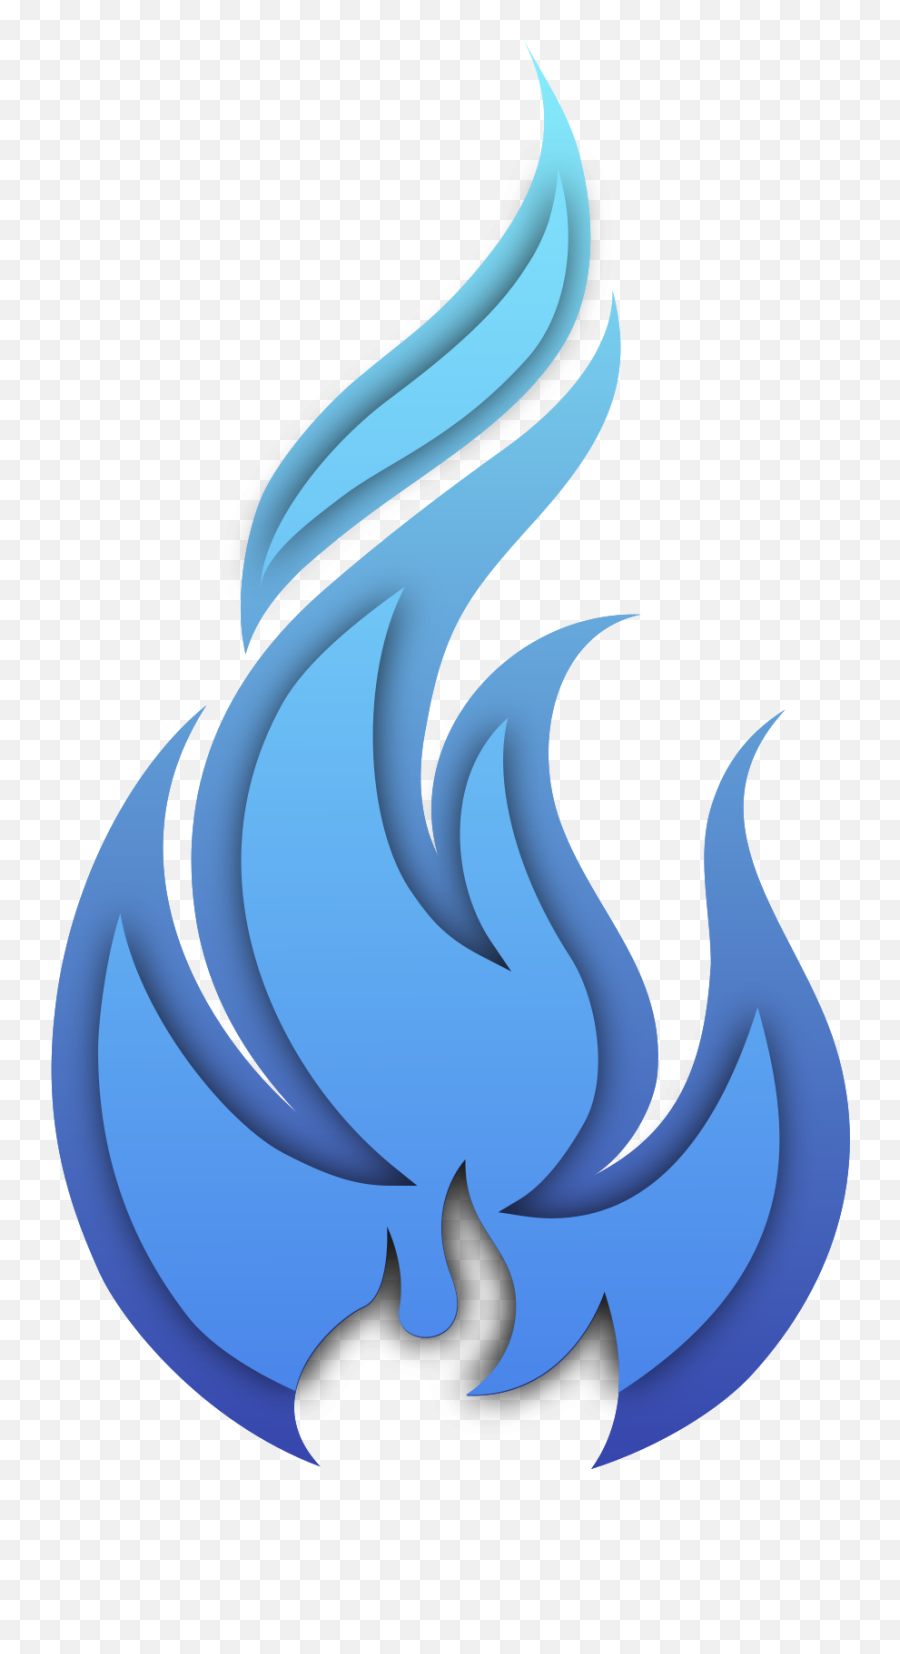 Free Blue Fire Png With Transparent Background - Vertical Emoji,Flames Png